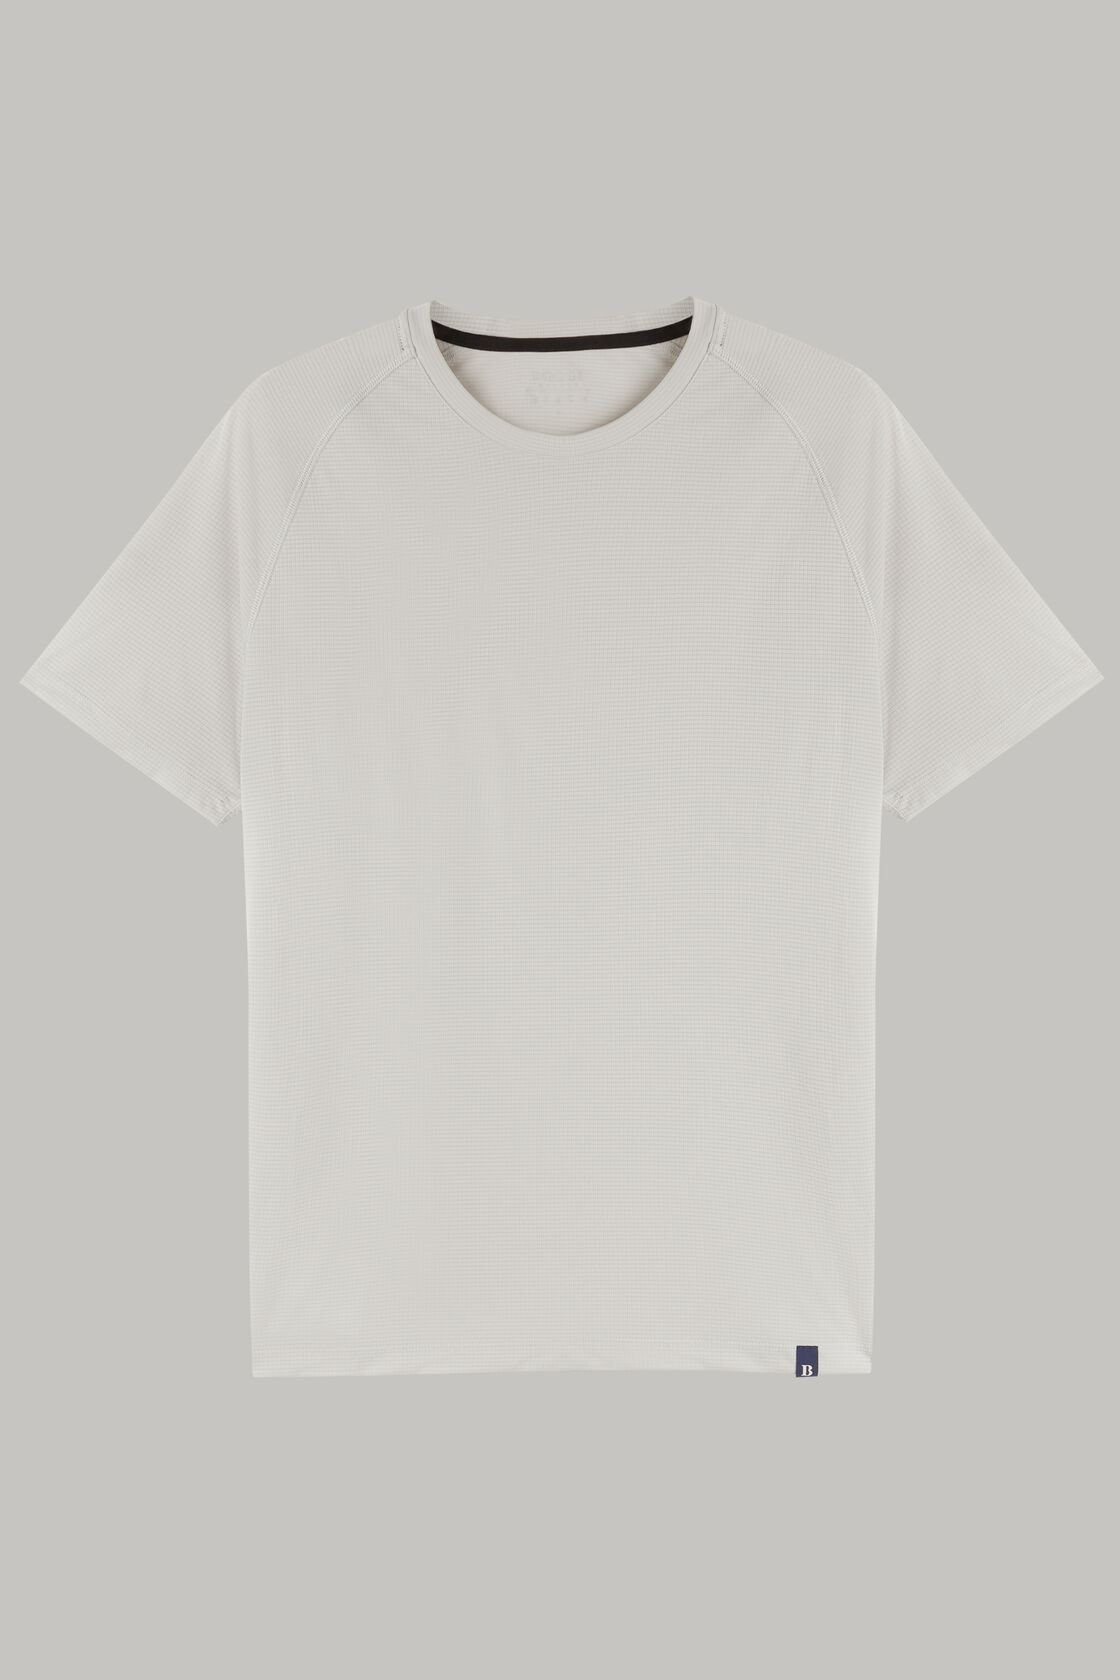 T-shirt in sustainable technical jersey, Ice, hi-res